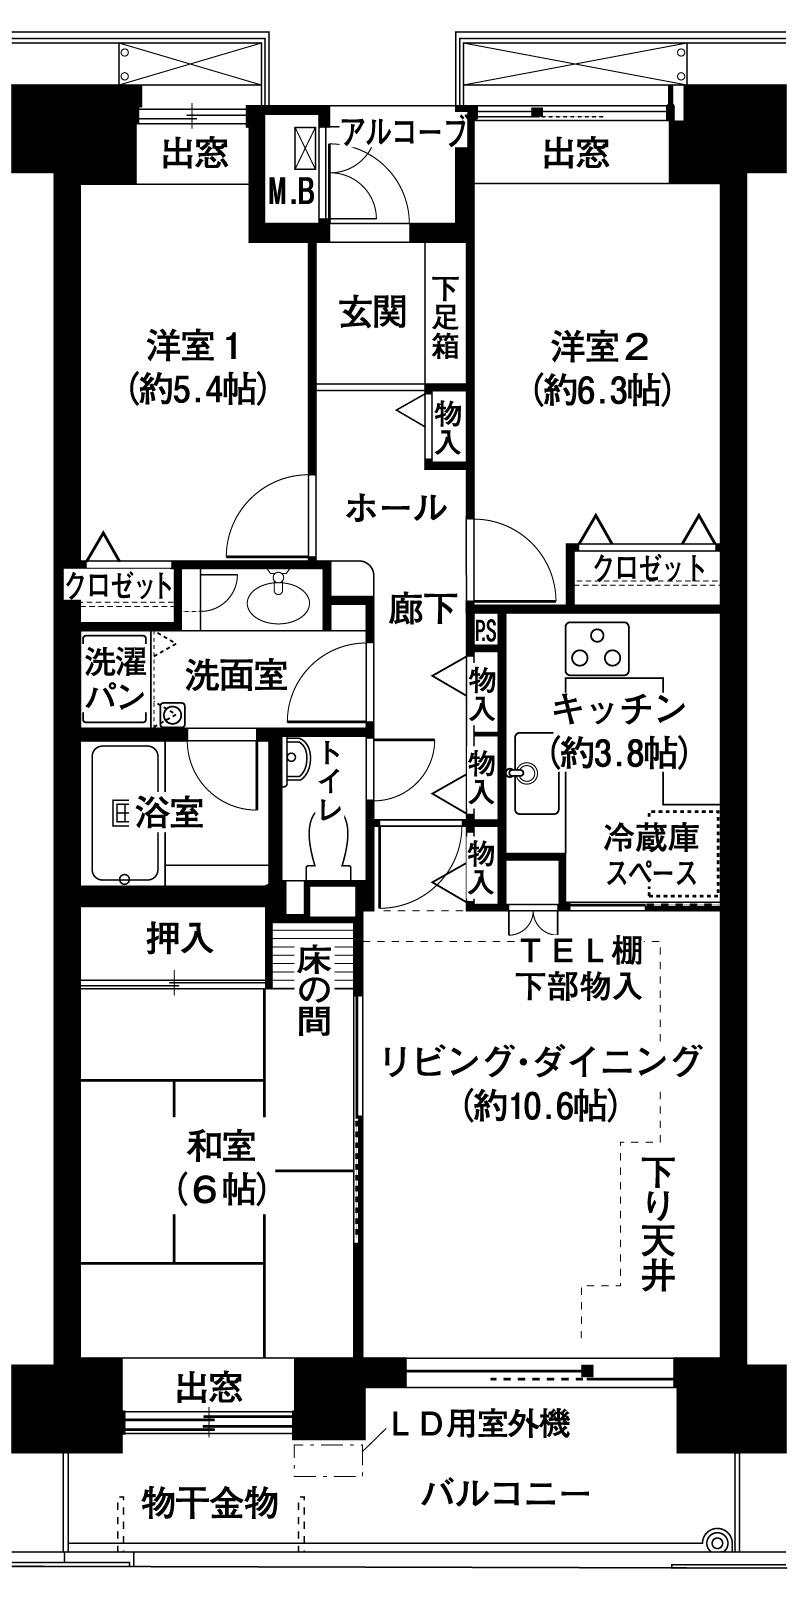 Floor plan. 3LDK, Price 26,800,000 yen, Occupied area 74.39 sq m , Cooking space spacious balcony area 12.22 sq m ● U-shaped kitchen. ● each room closets and hallways material input, such as, Storage enhancement. ● The Japanese with "alcove".